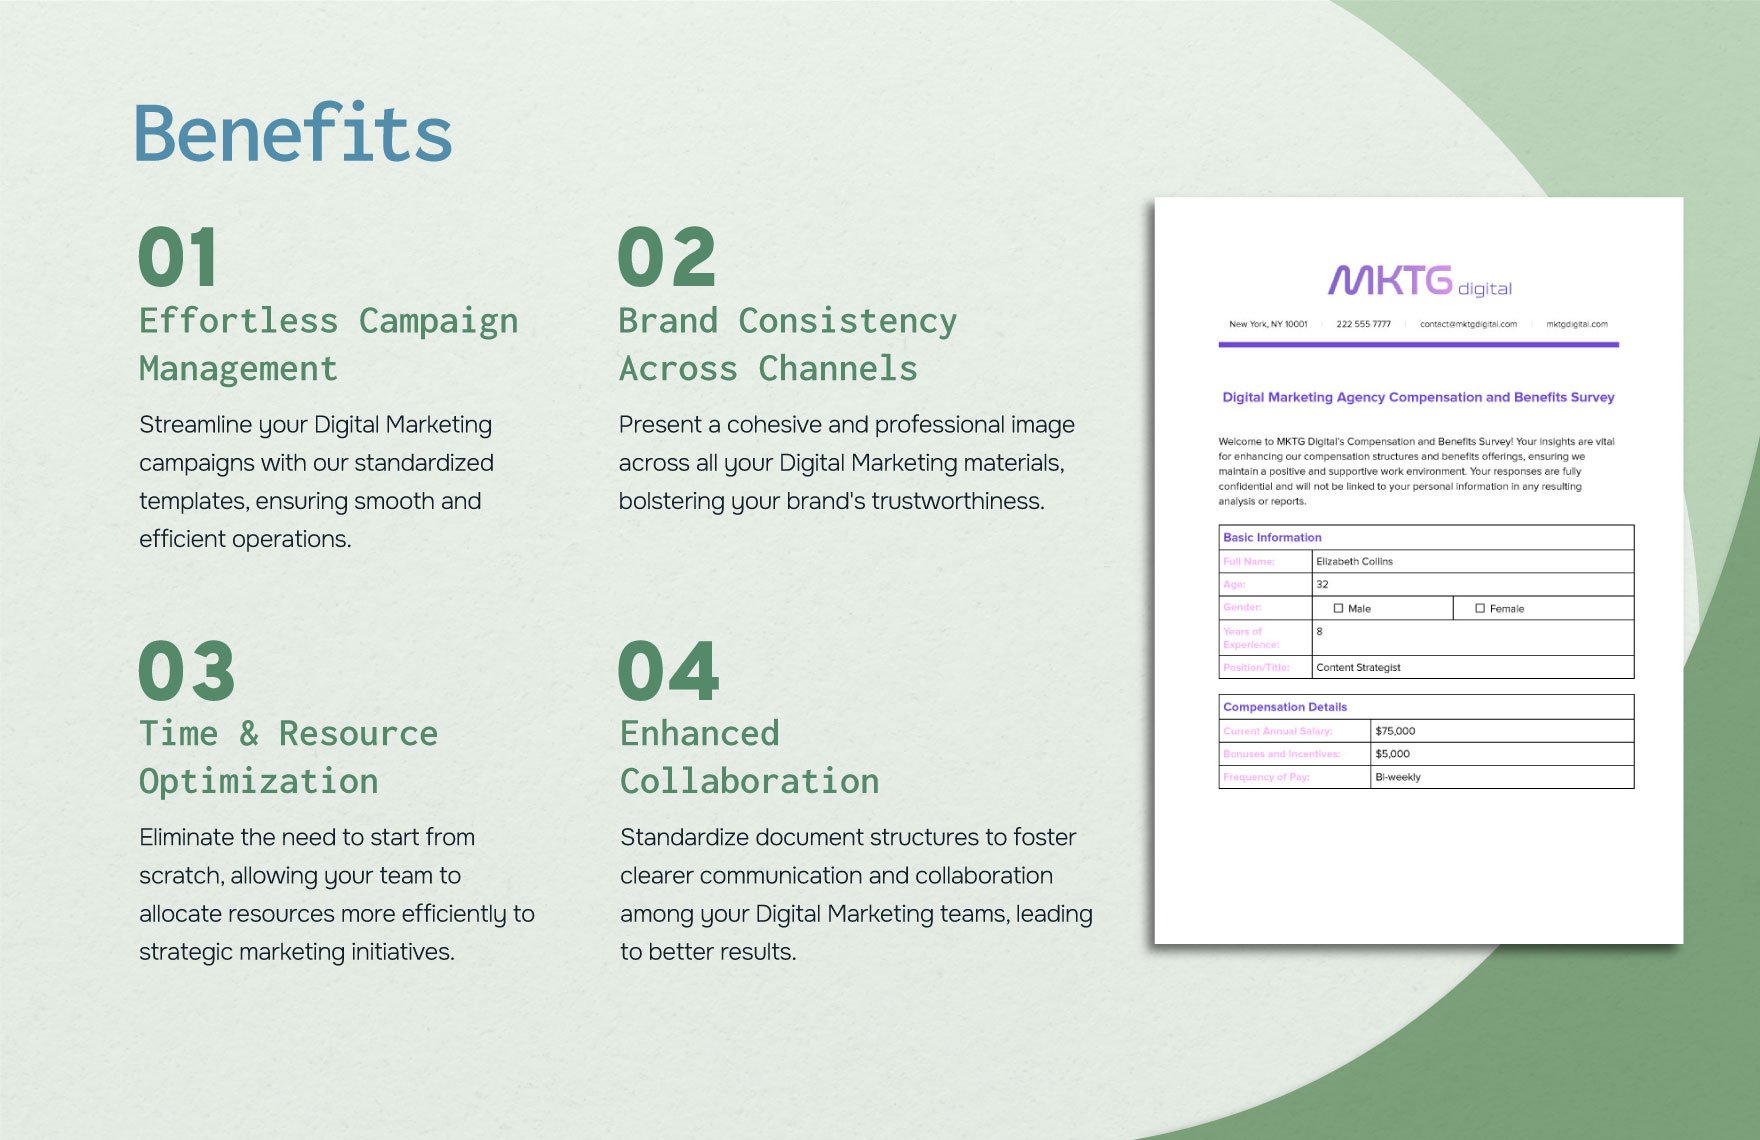 Digital Marketing Agency Compensation and Benefits Survey HR Template